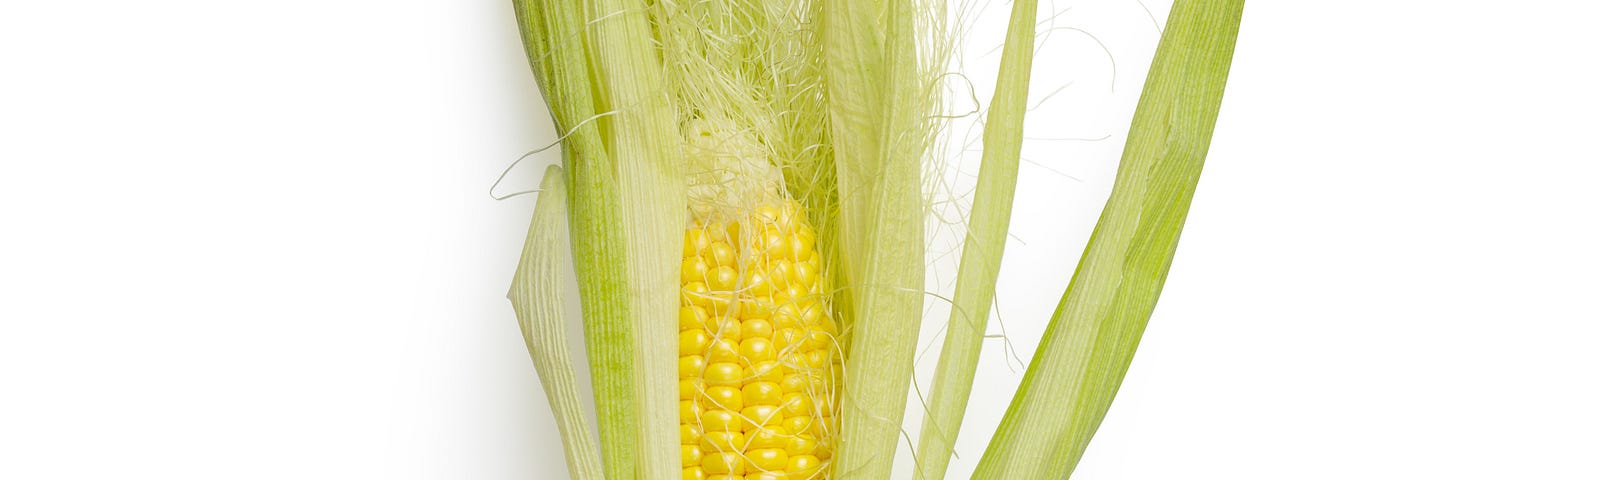 what nutrition does corn have